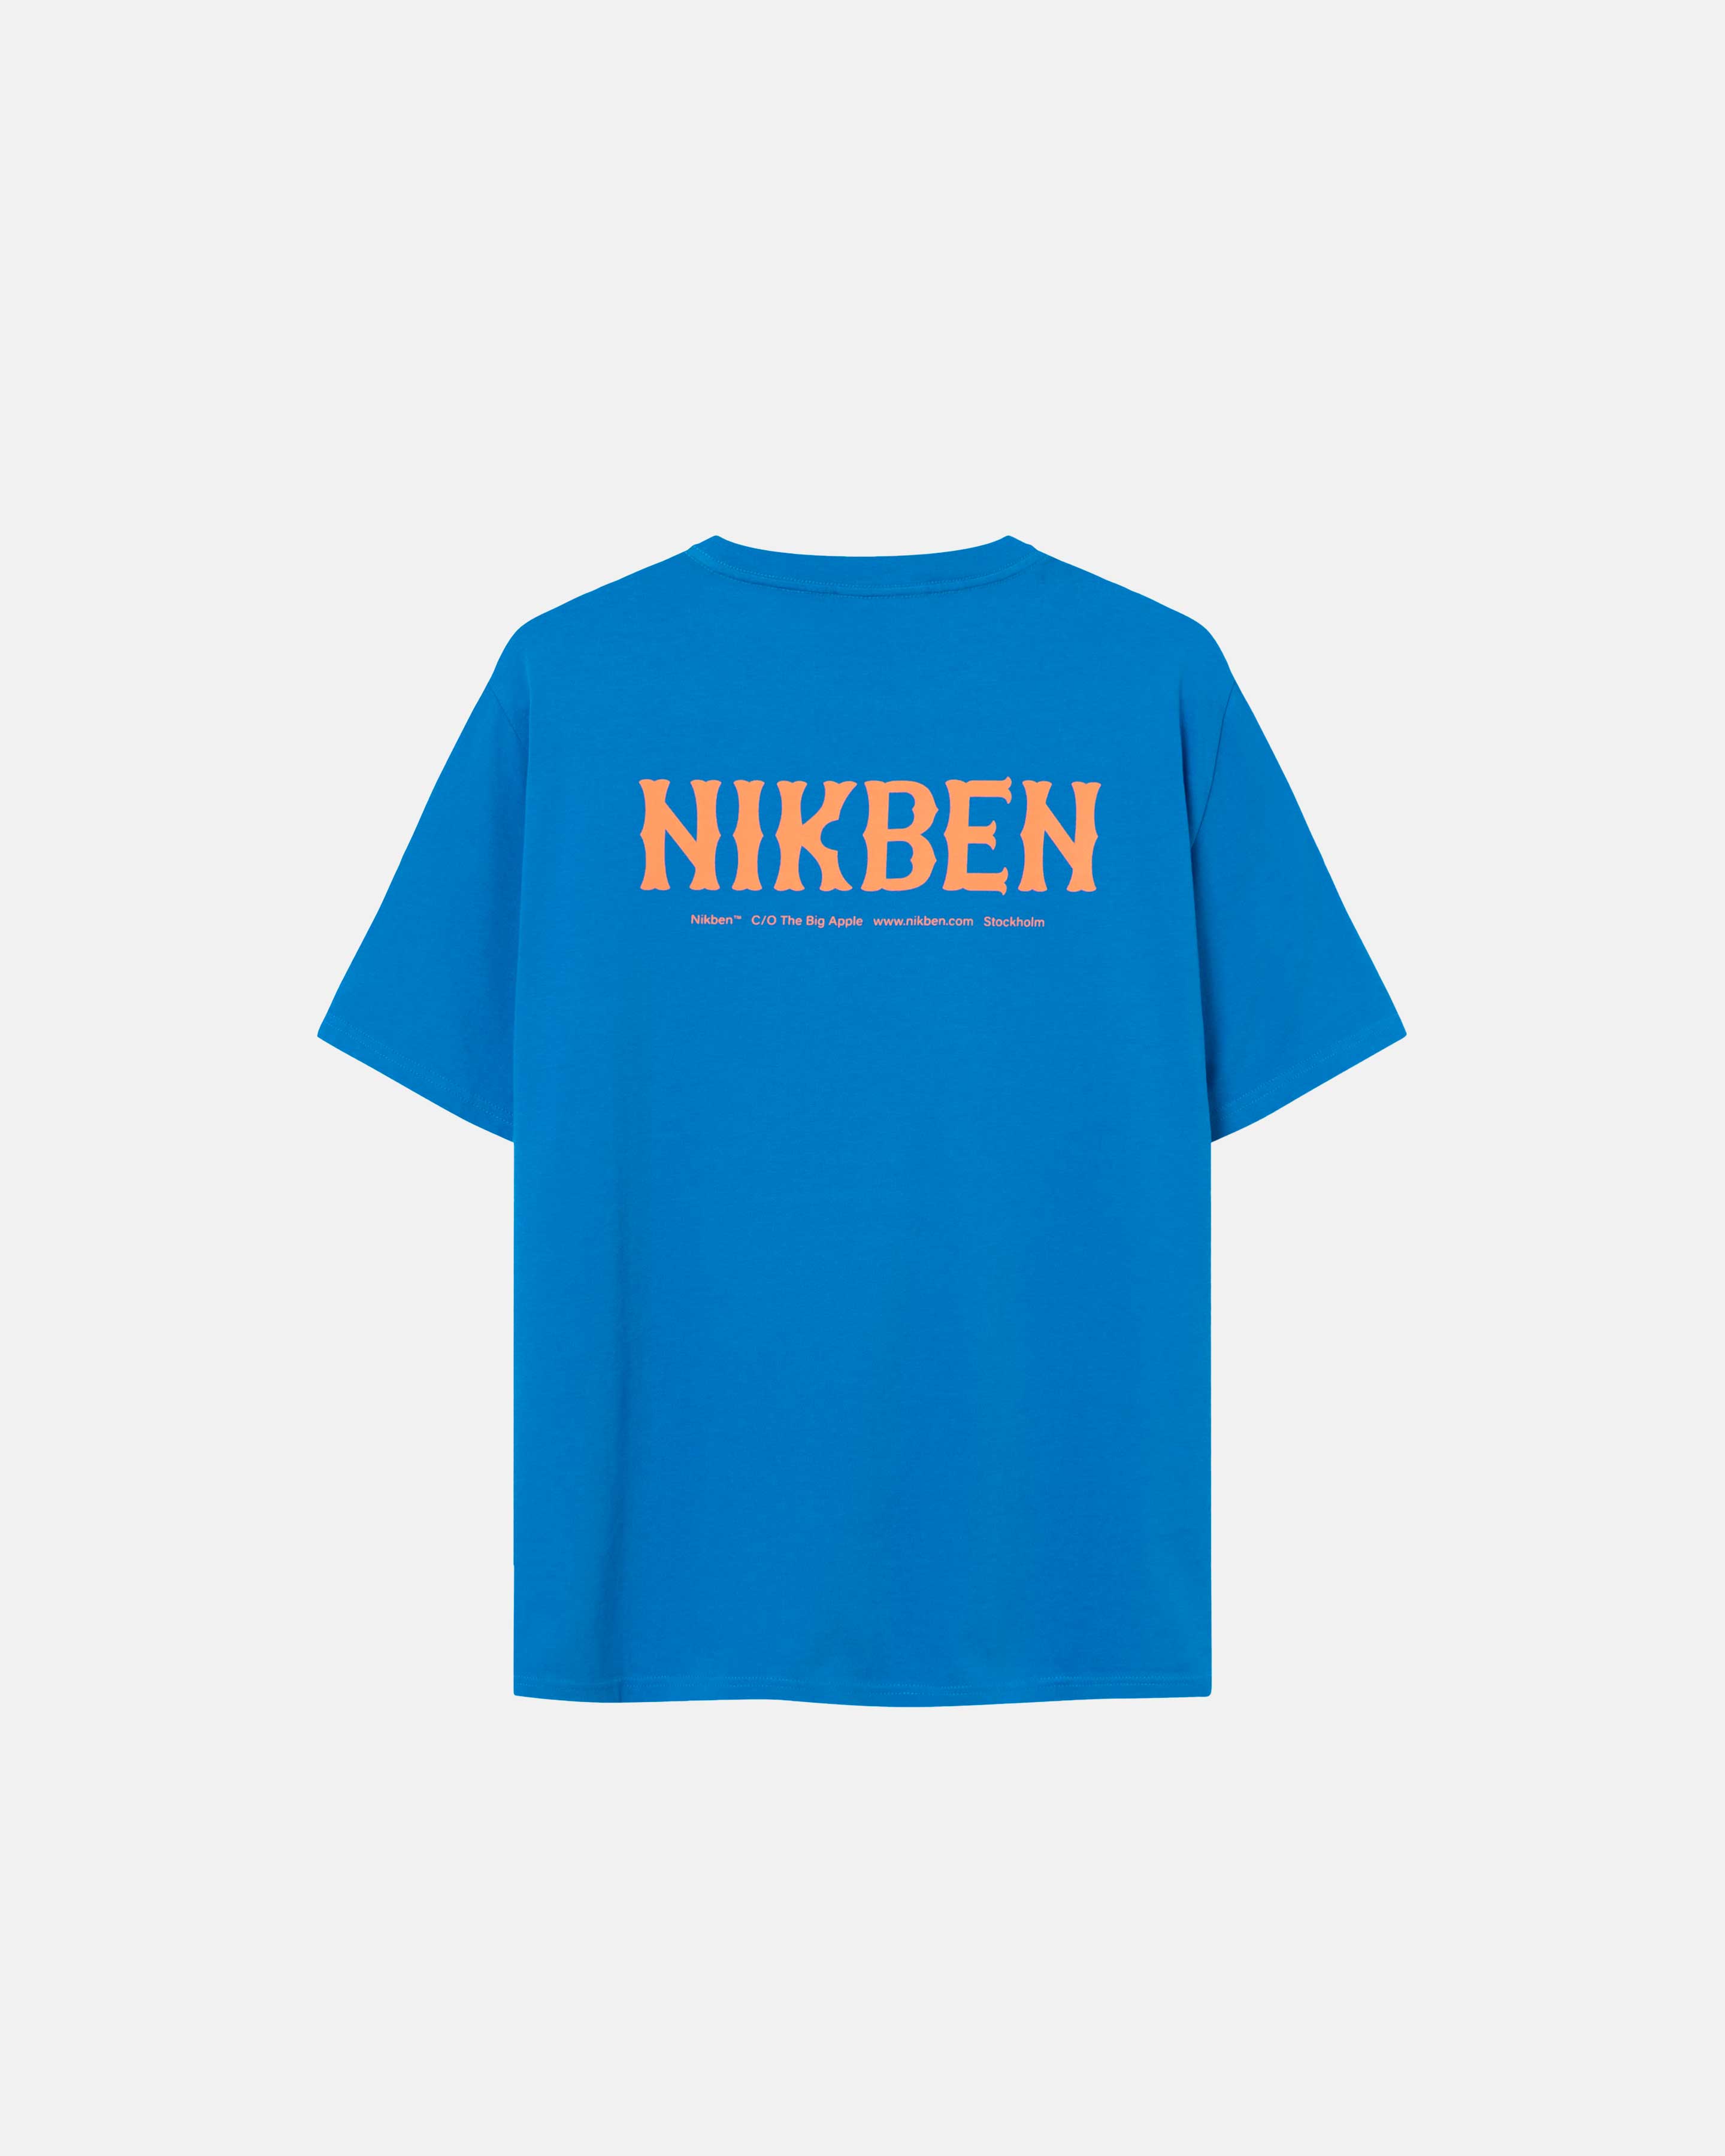 Back view of blue t-shirt with orange 